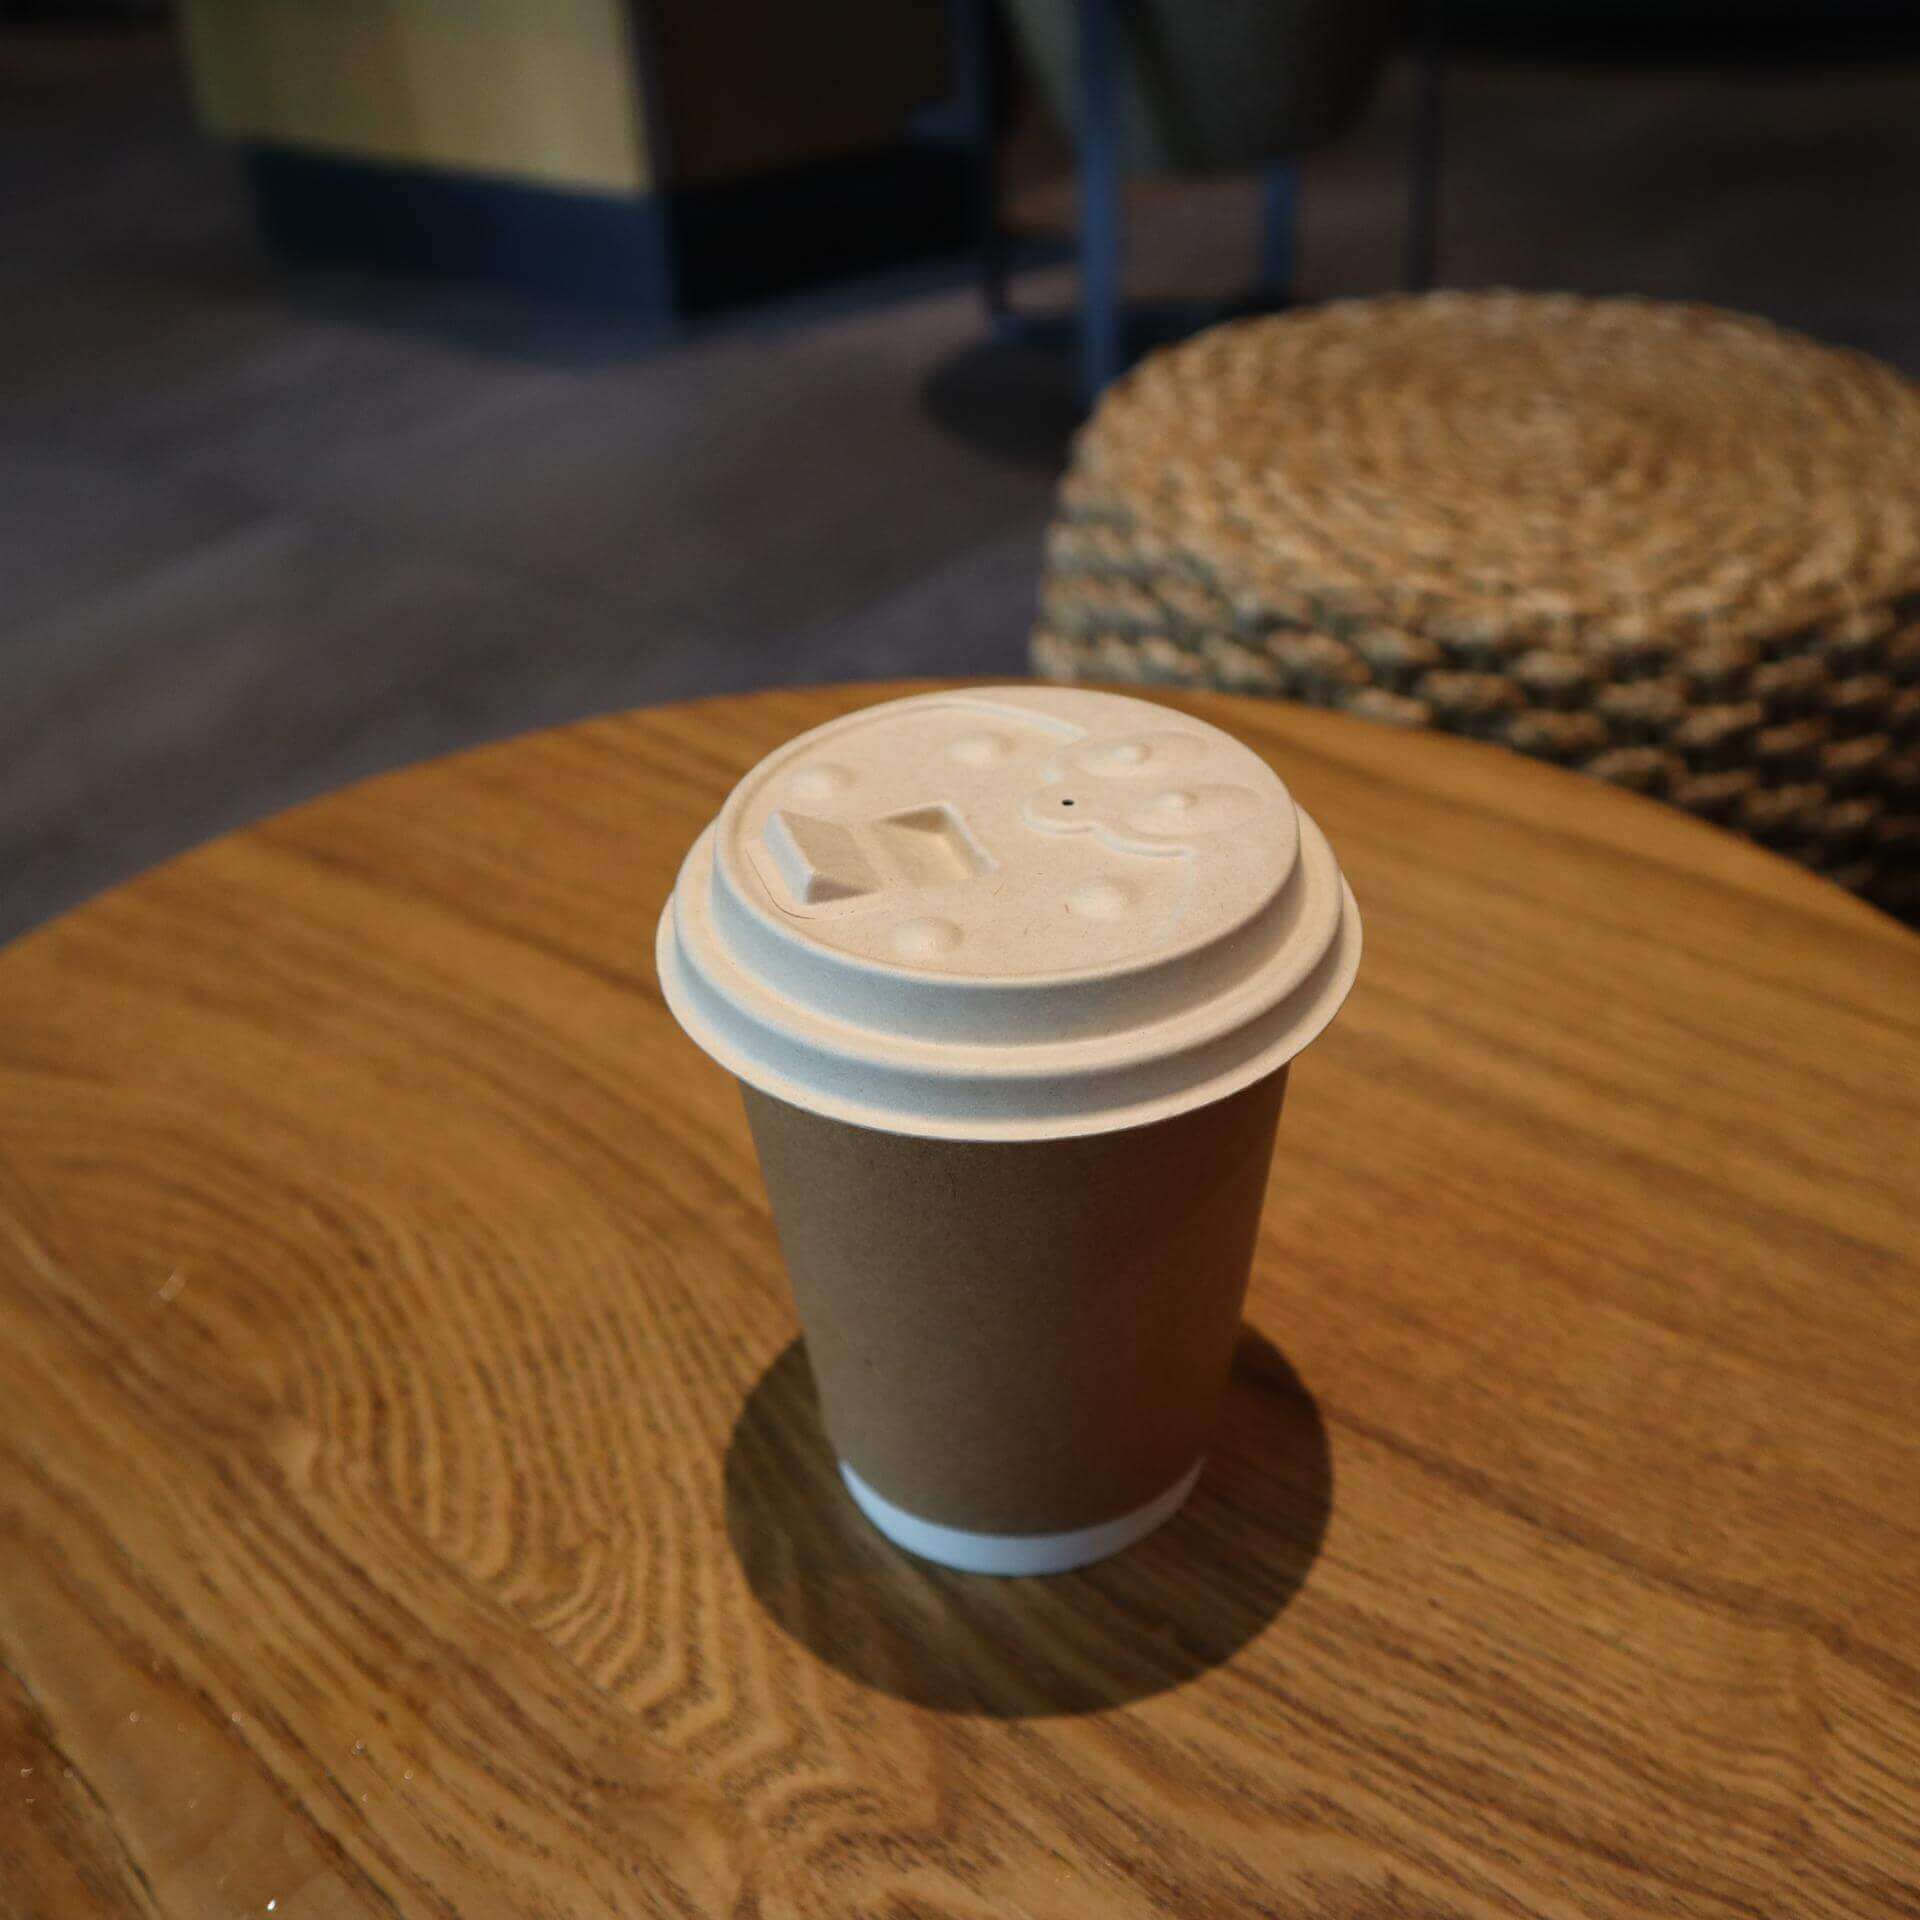 paper cup with cover